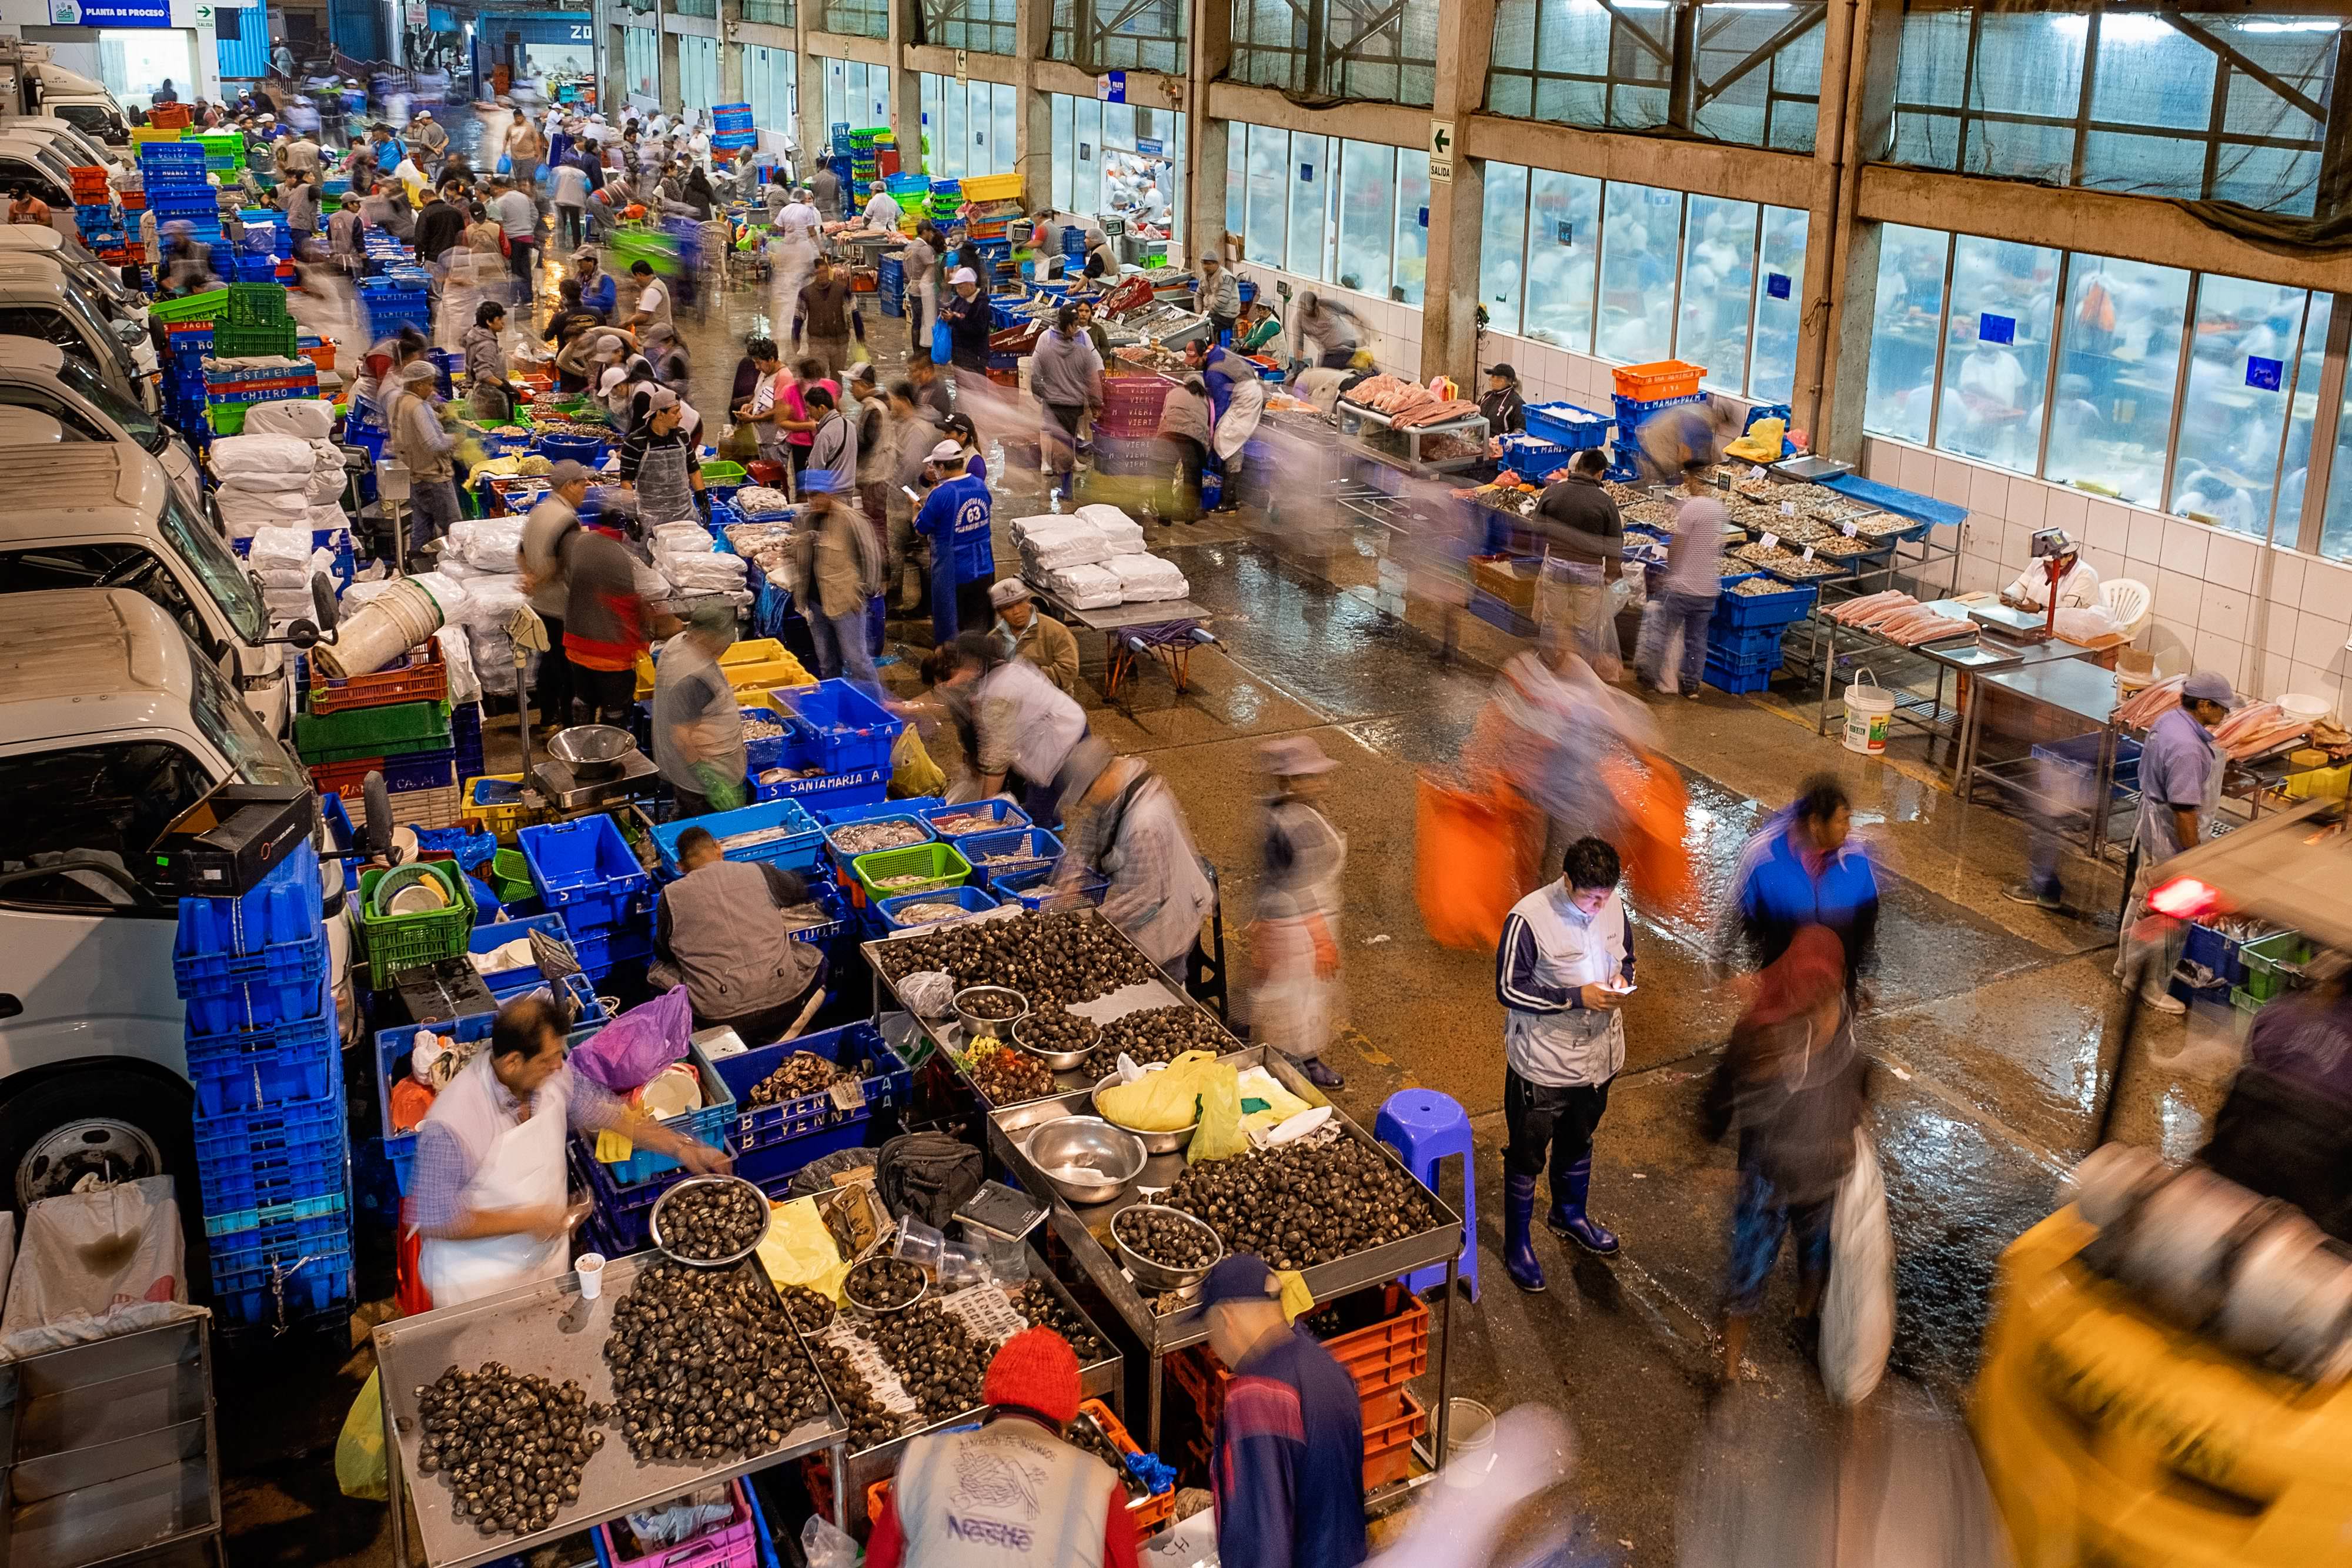 This is an example of a larger fish market in Lima, Peru.